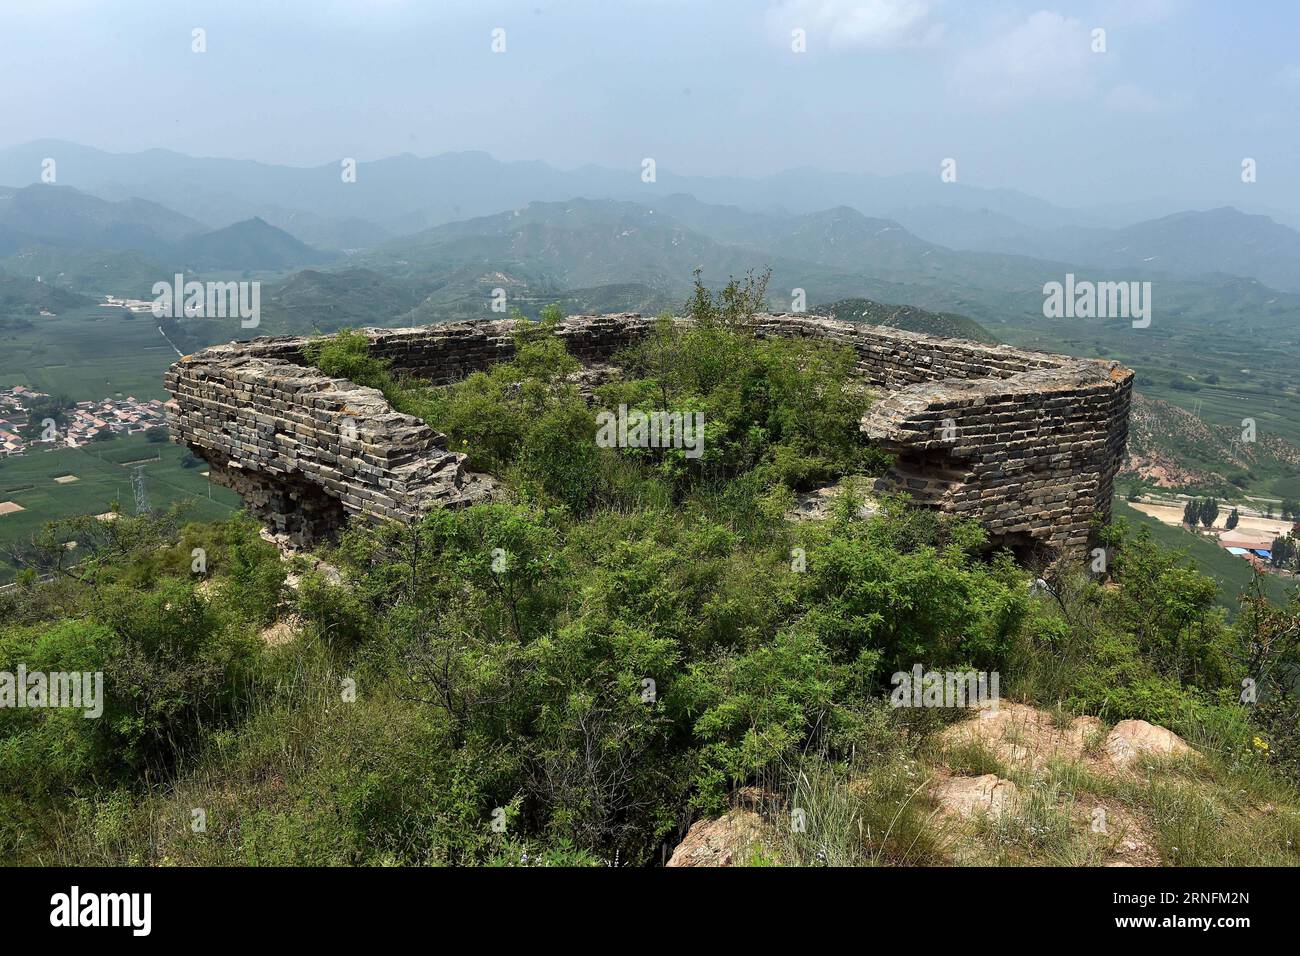 (160815) -- TAIYUAN, Aug. 15, 2016 -- Photo taken on Aug. 11, 2016 shows ruins of a blockhouse of the Japanese army on Fengpo Mountain in Shangshe Village of Yu County, north China s Shanxi Province. Monday marked the 71st anniversary of Japan s unconditional surrender at the end of World War II. Some 400,000 women in Asian were made into comfort women for the Japanese army during WWII, nearly half of which are Chinese, according to a research center of comfort women under the Humanities and Communication College of Shanghai Normal University. Since 1990, some 100 surviving comfort women began Stock Photo